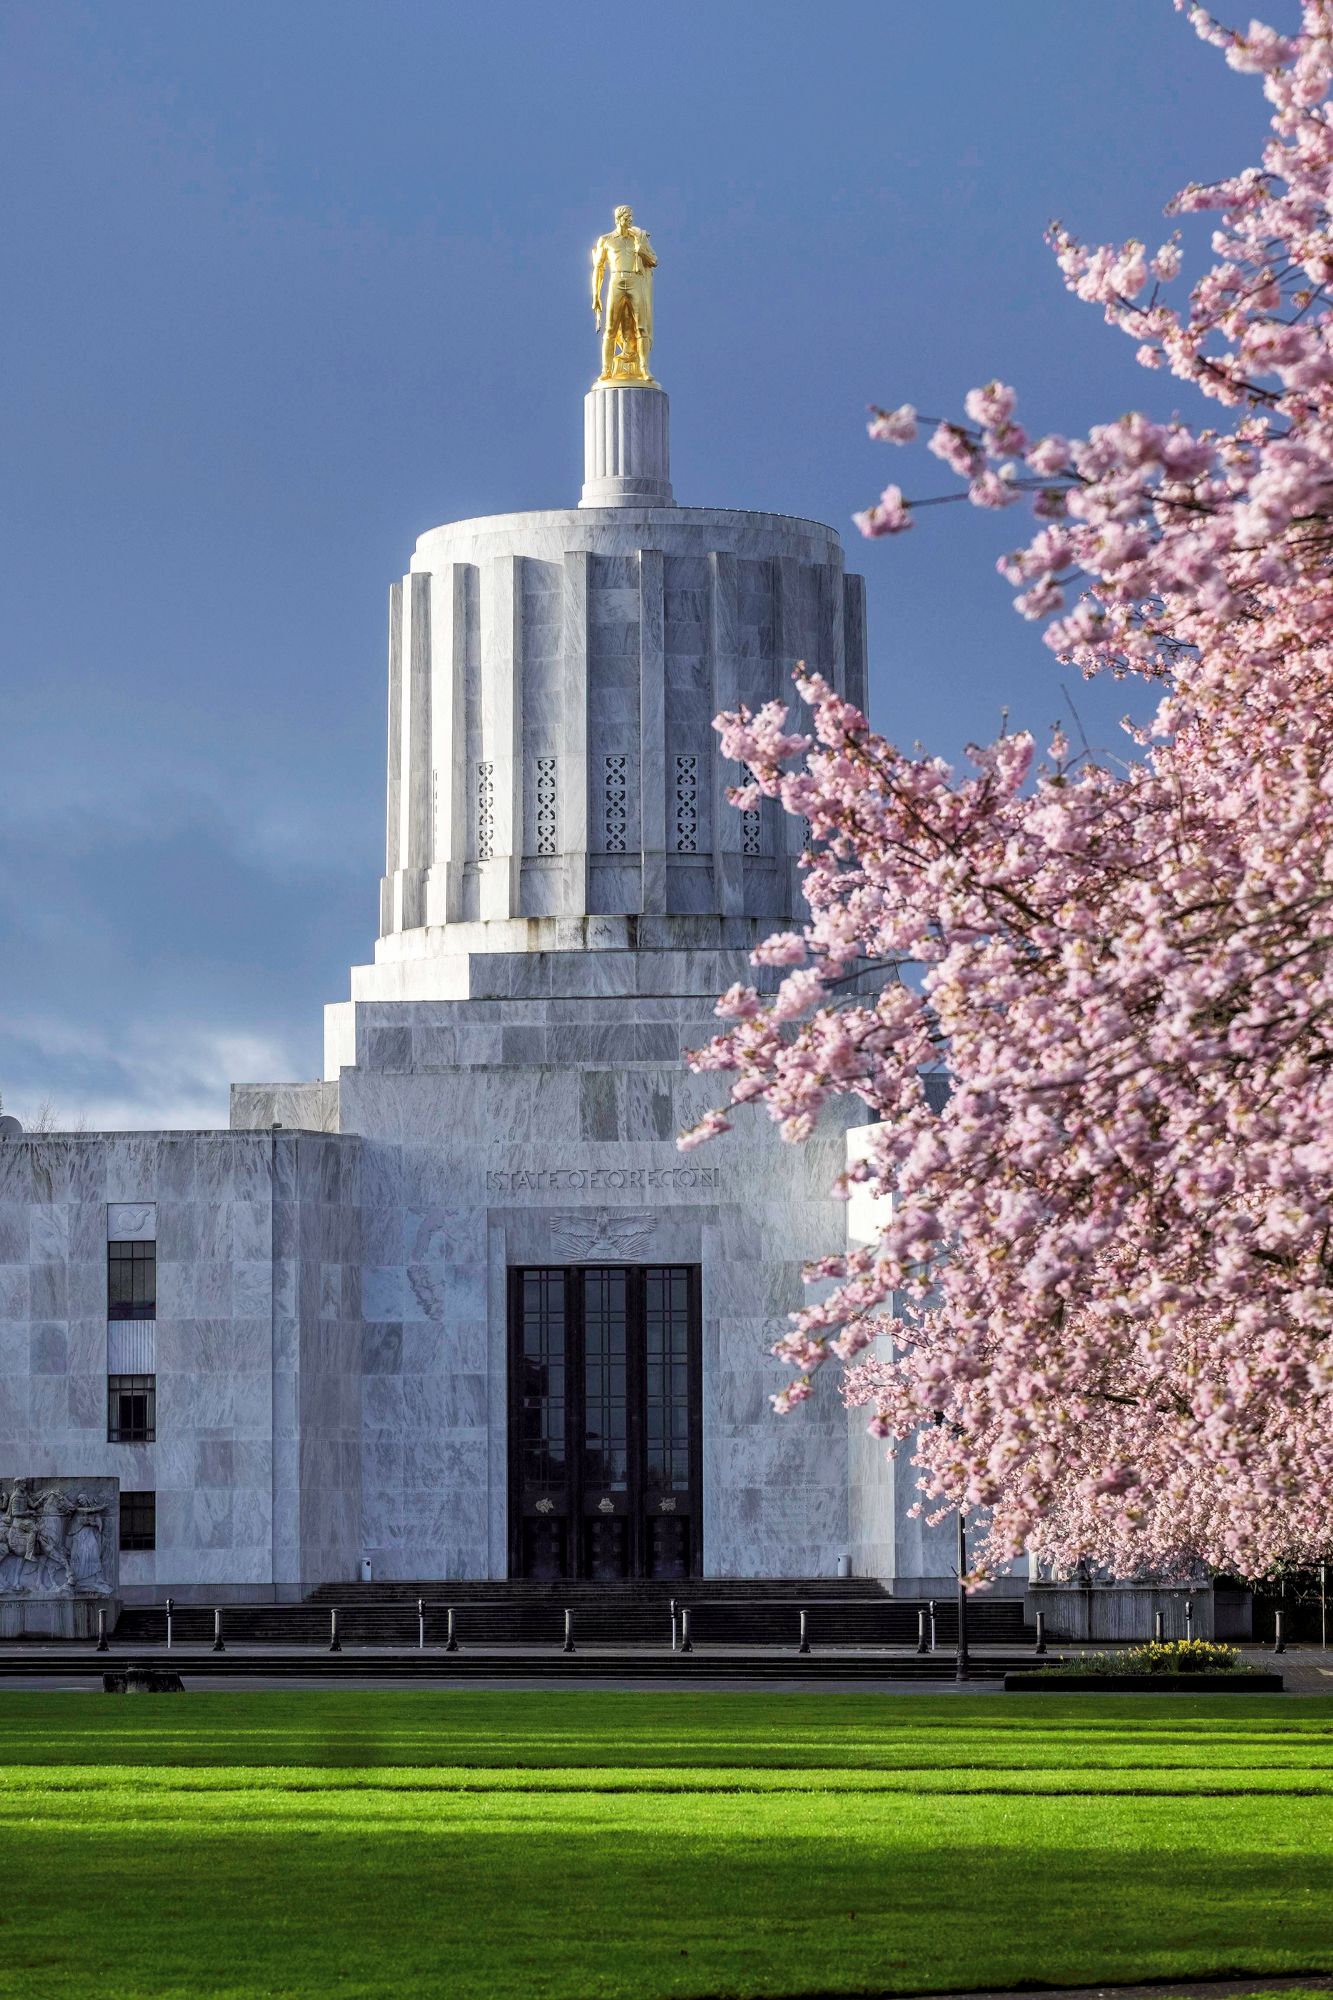 Oregon State Capitol from the Capitol Mall with cherry blossom trees in full bloom.